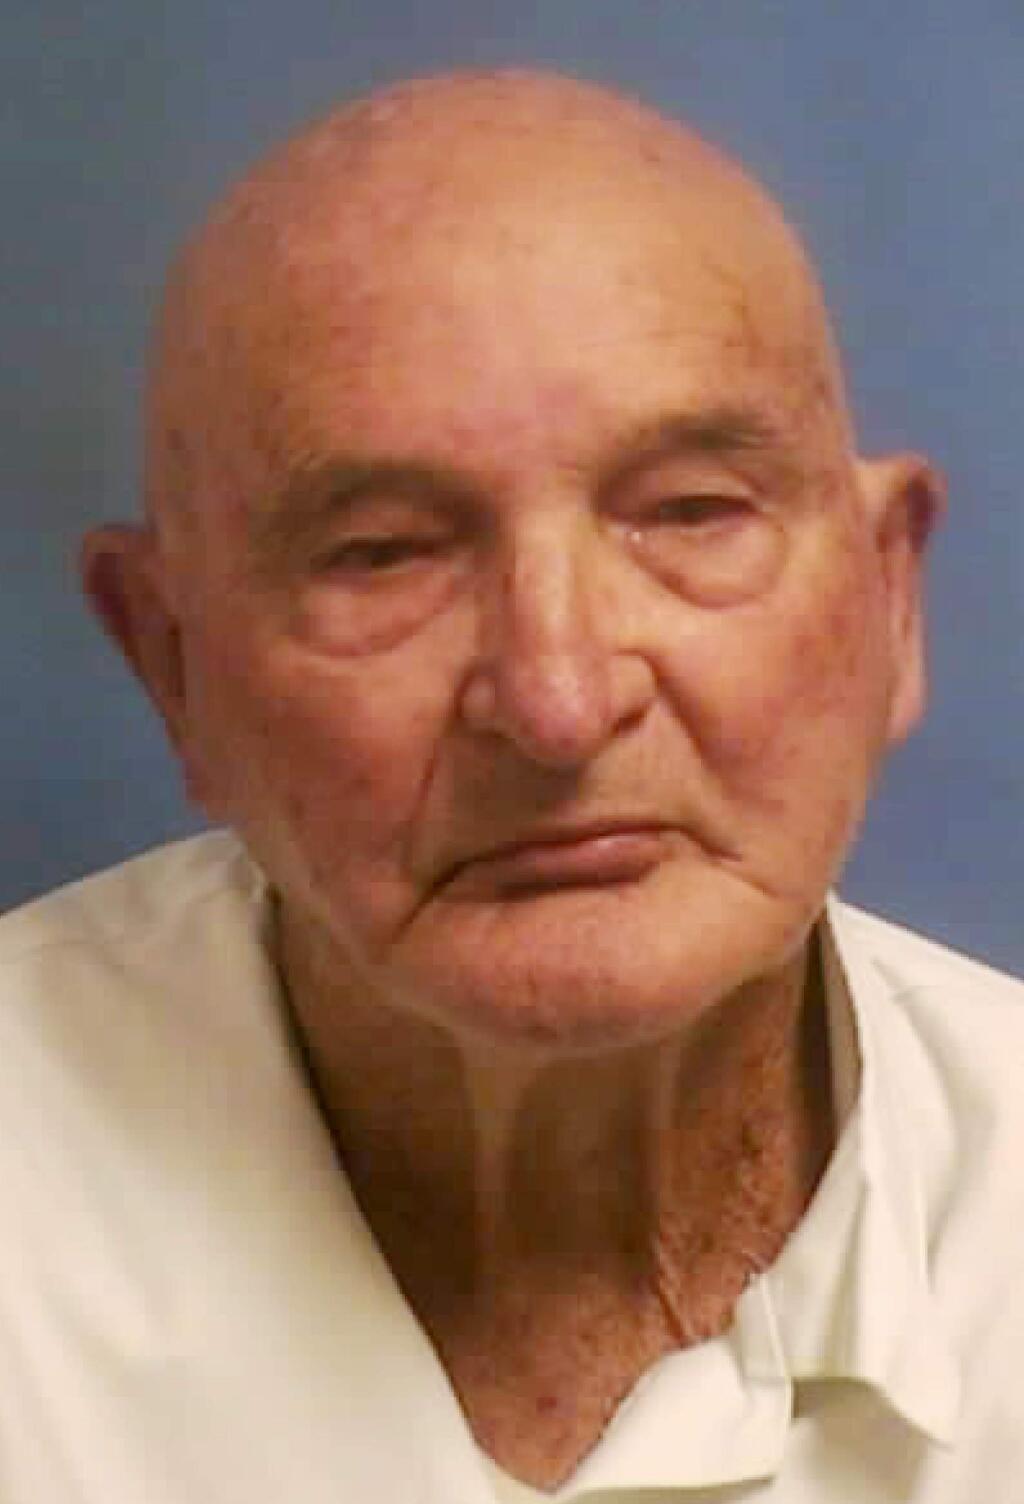 This undated photo provided by the Mississippi Department of Corrections shows Edgar Ray Killen, a former Ku Klux Klan leader who was convicted in the 1964 'Mississippi Burning' slayings of three civil rights workers. Killen died in prison at the age of 92, the state's corrections department announced Friday, Jan. 12, 2018. (Mississippi Department of Corrections via AP)